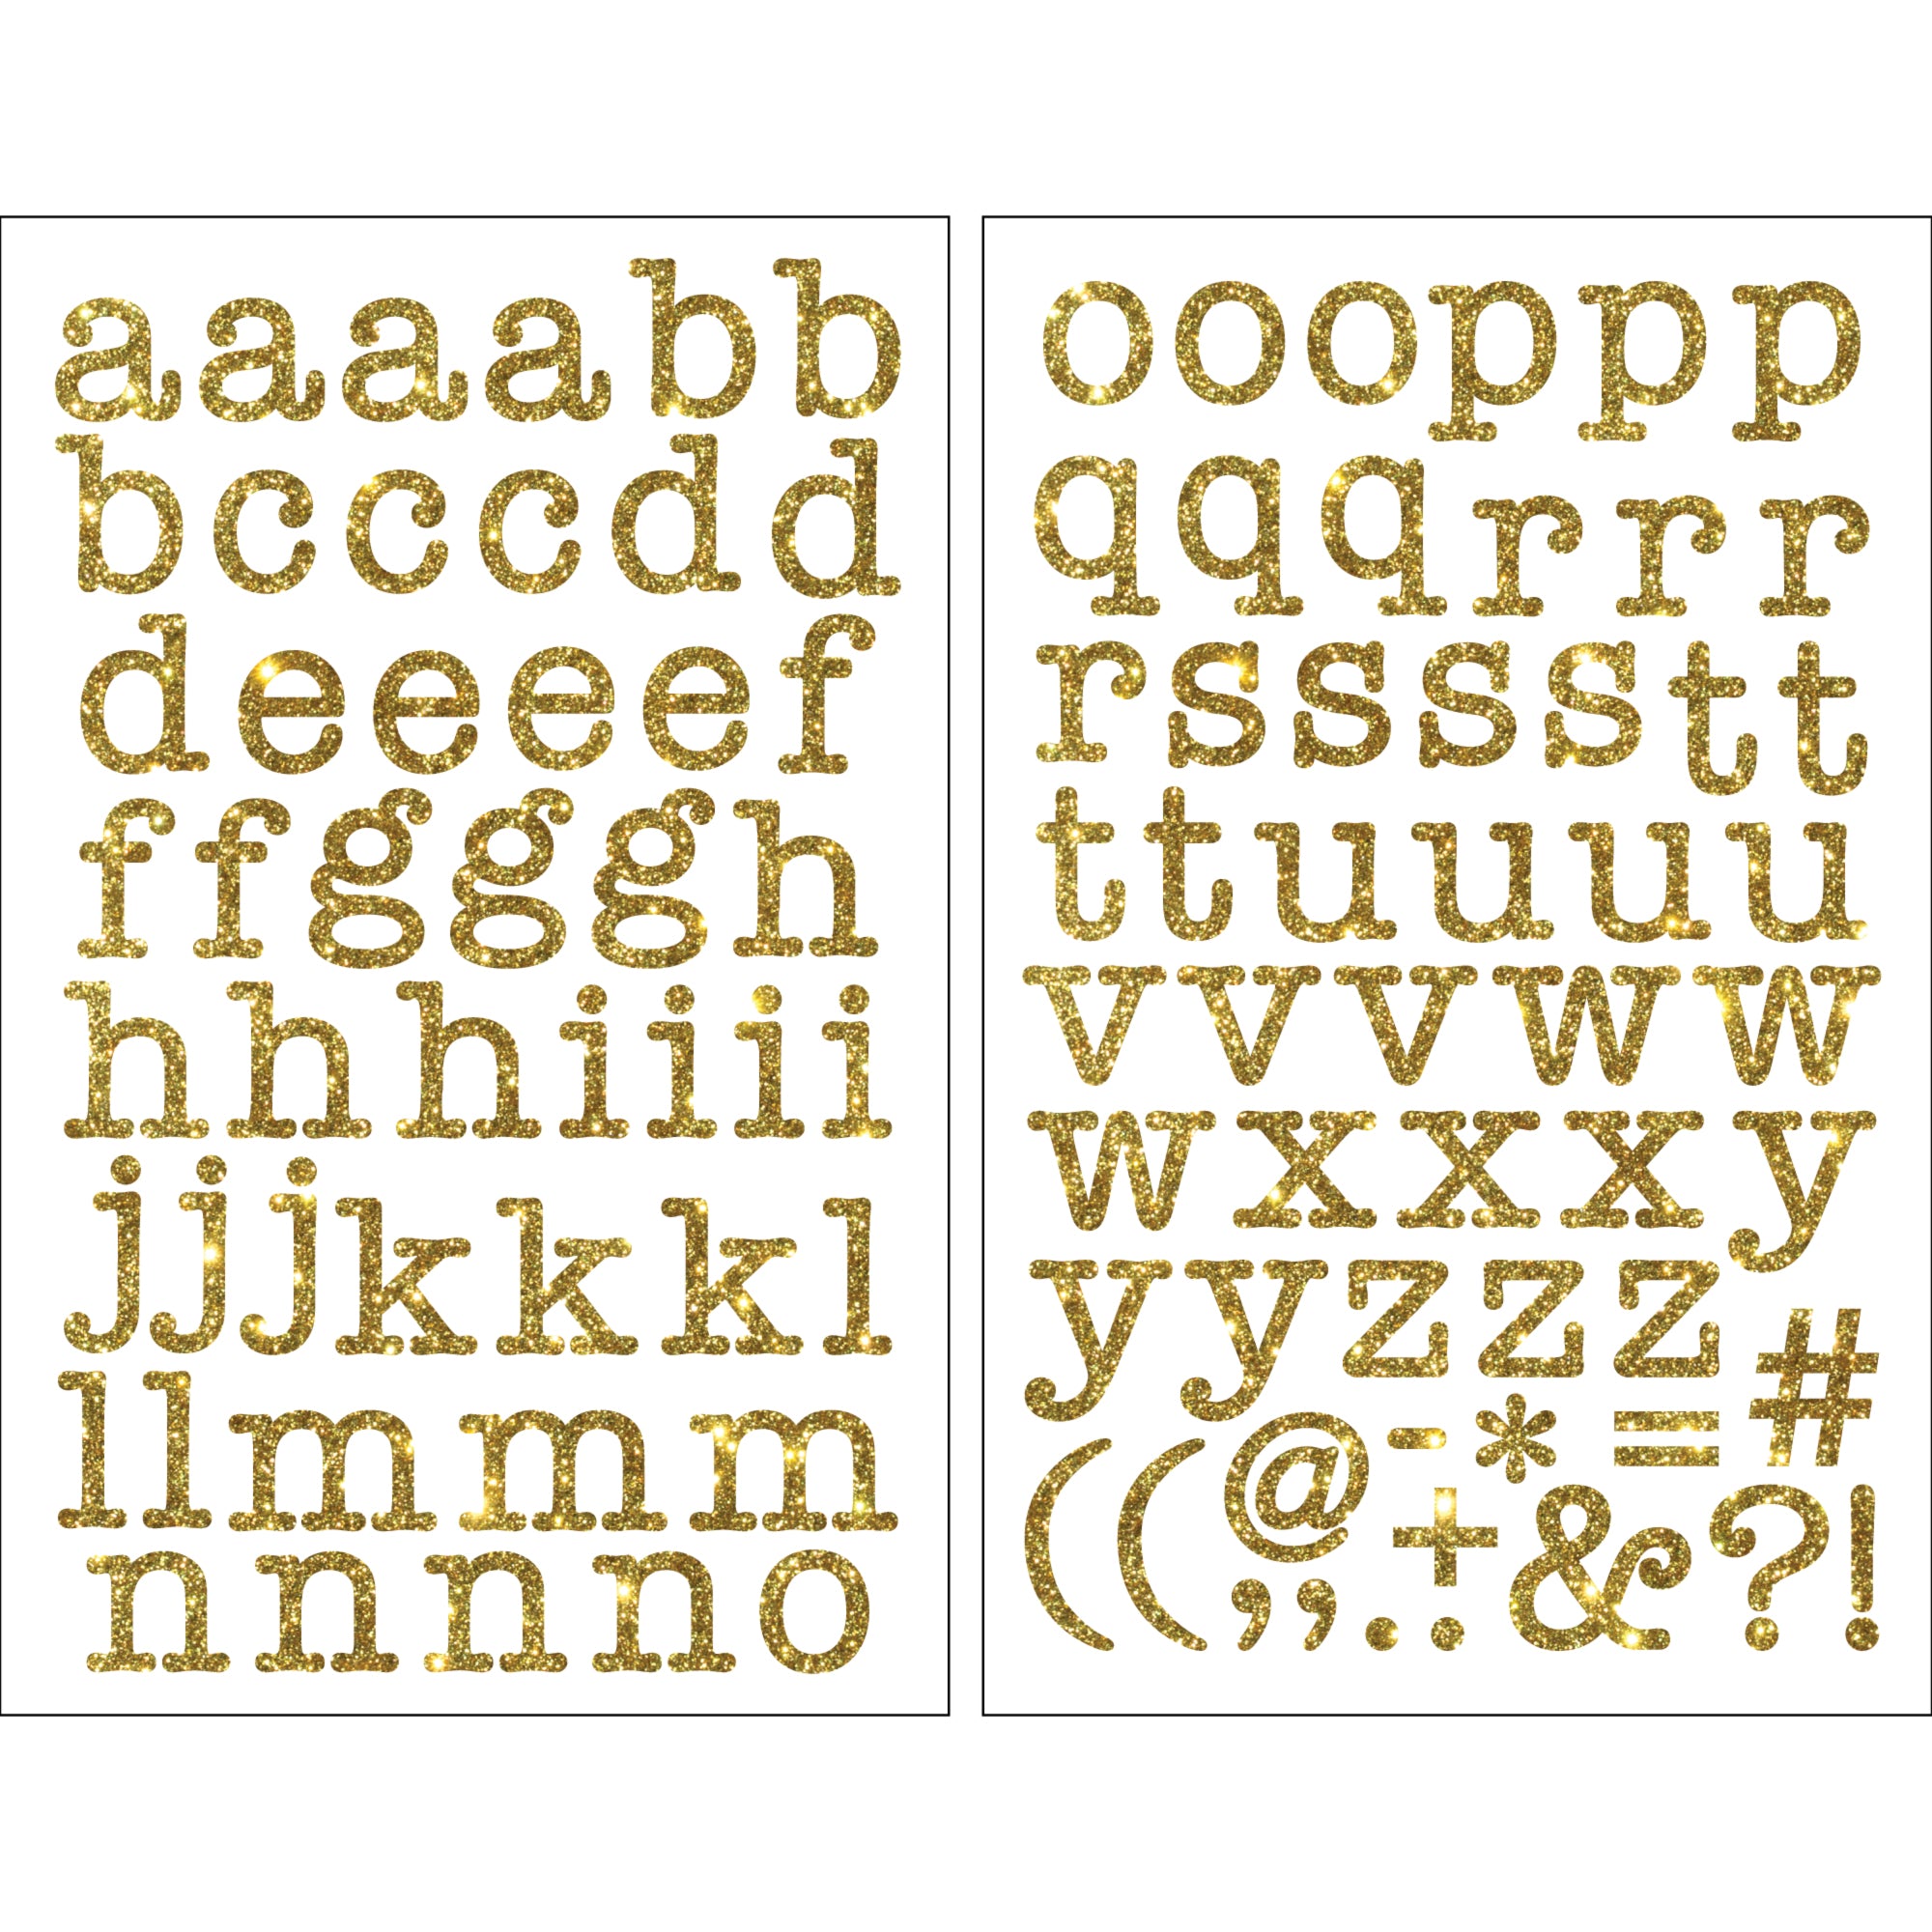 12 Packs: 48 Ct. (576 Total) 1 inch Iron-On Gold Glitter Letters by Imagin8